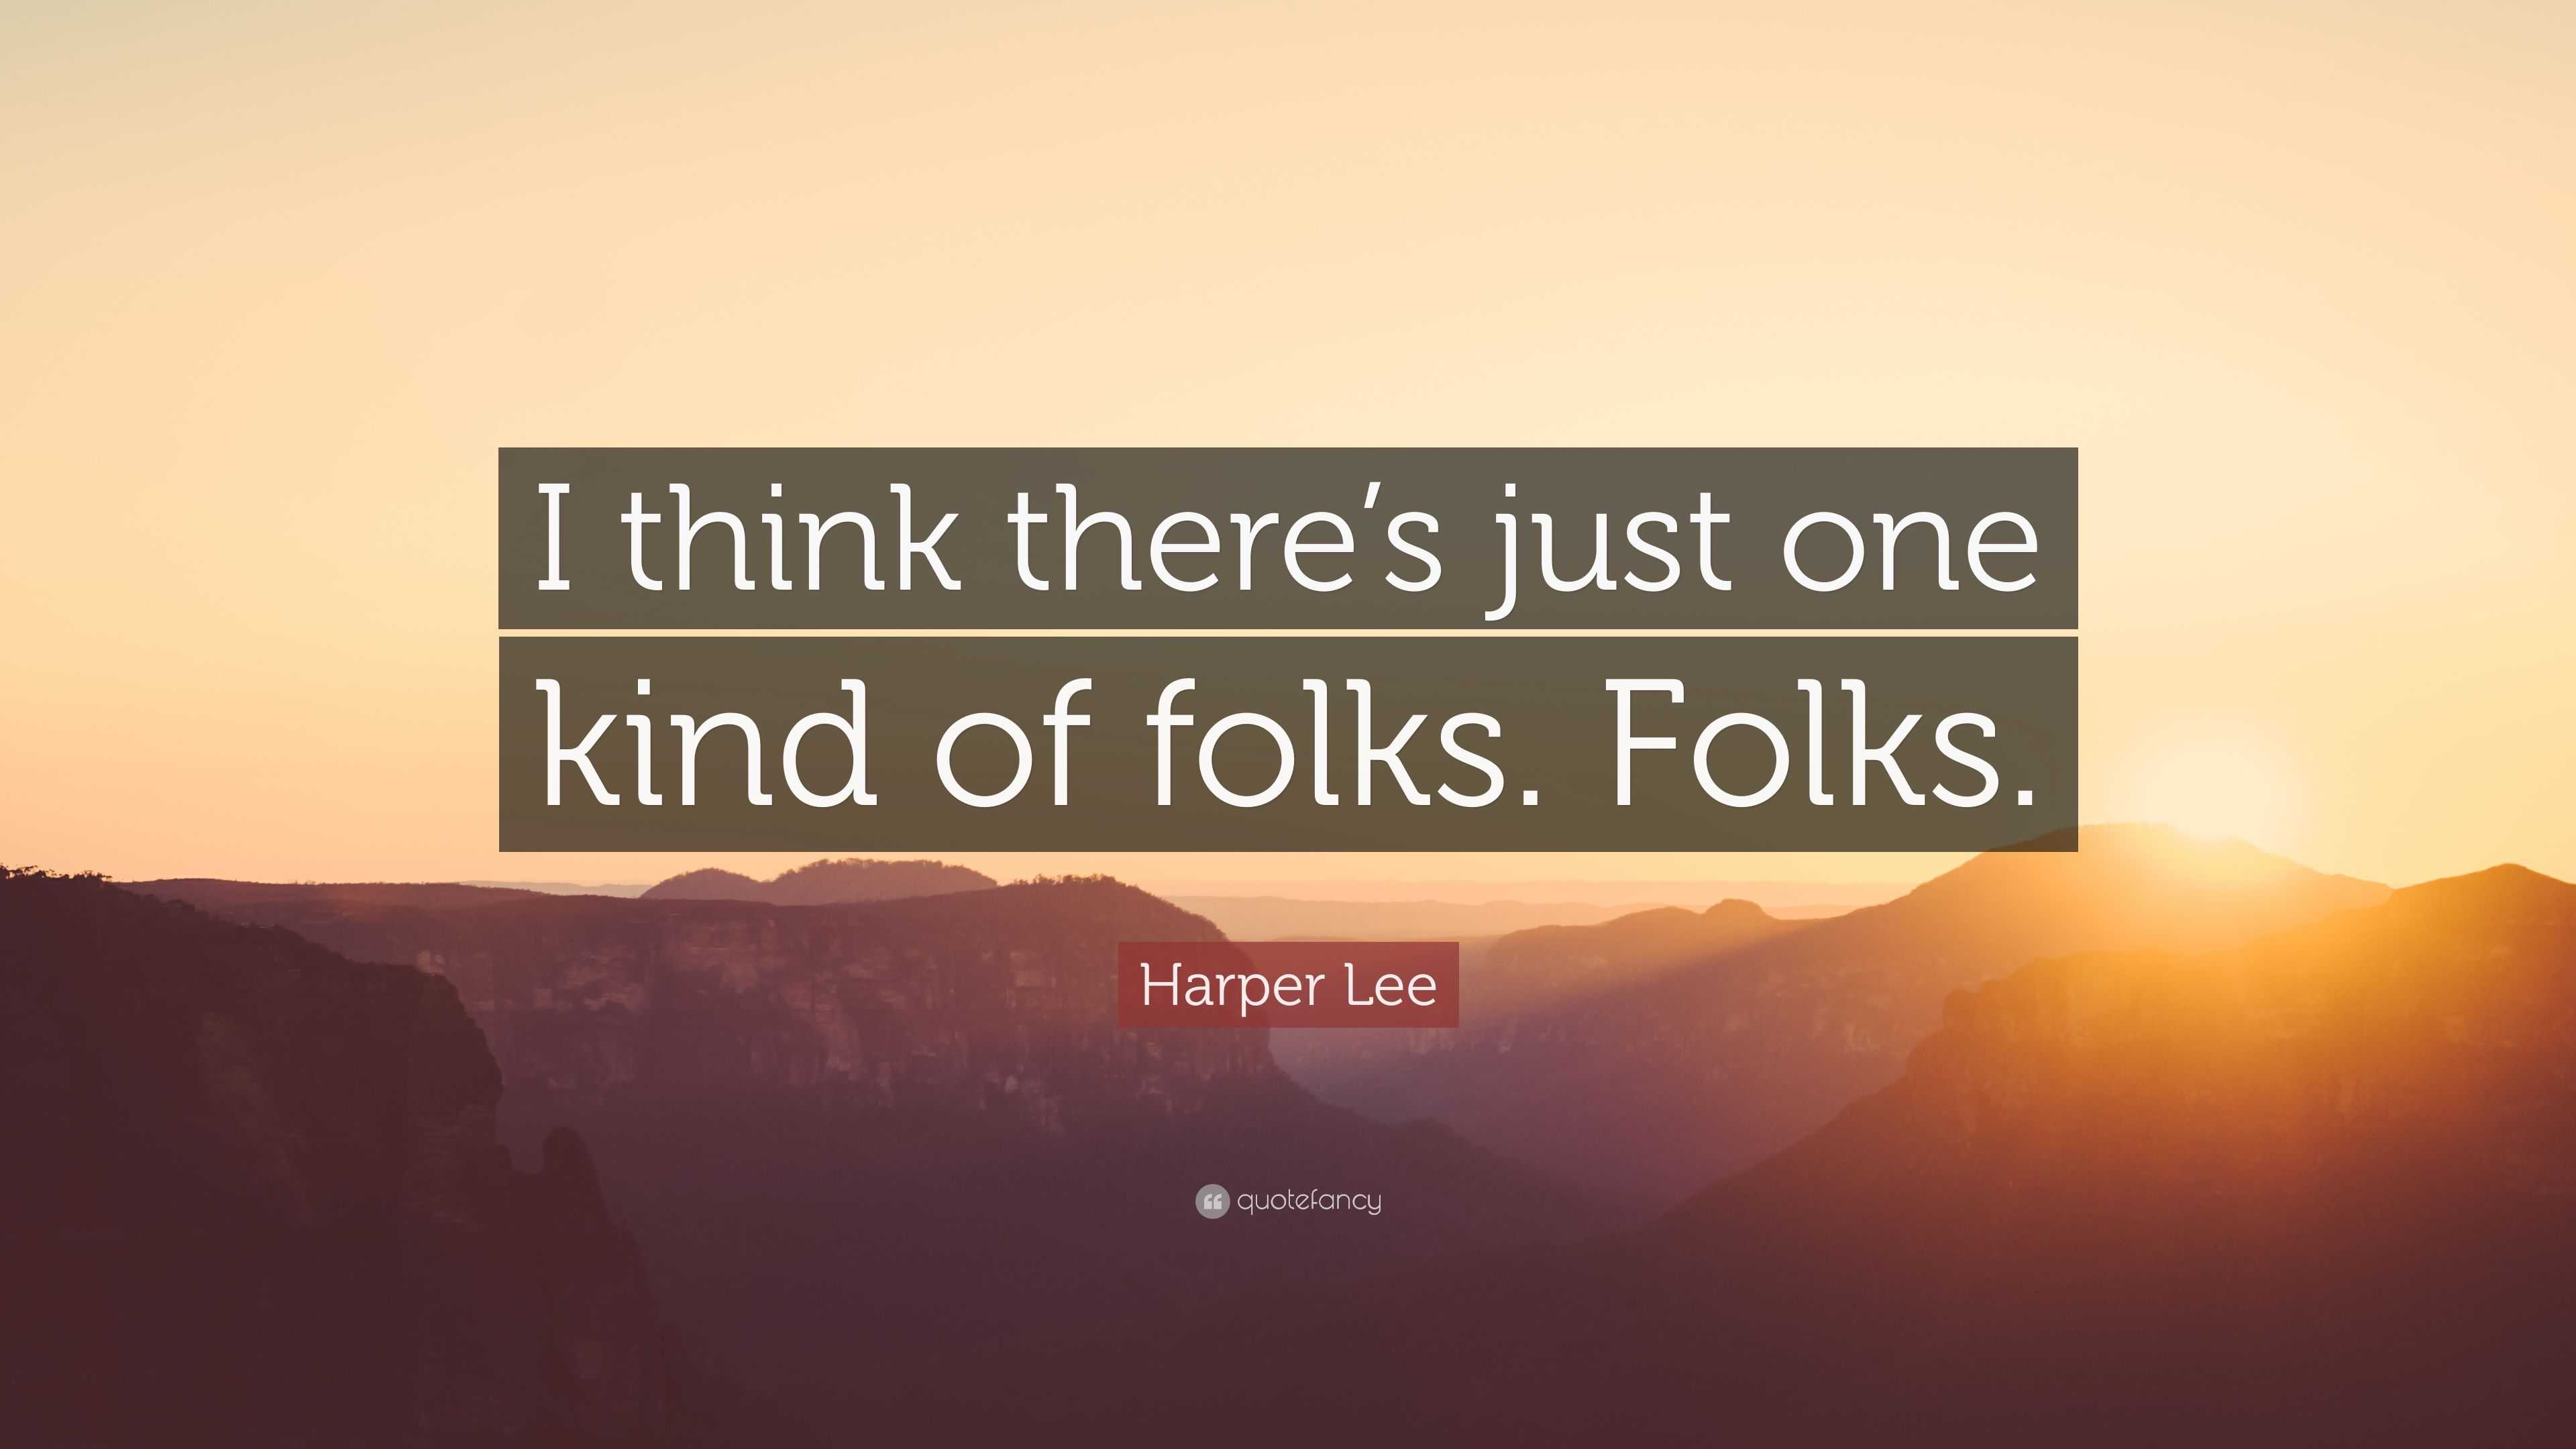 Harper Lee Quote: “I think there’s just one kind of folks. Folks.”